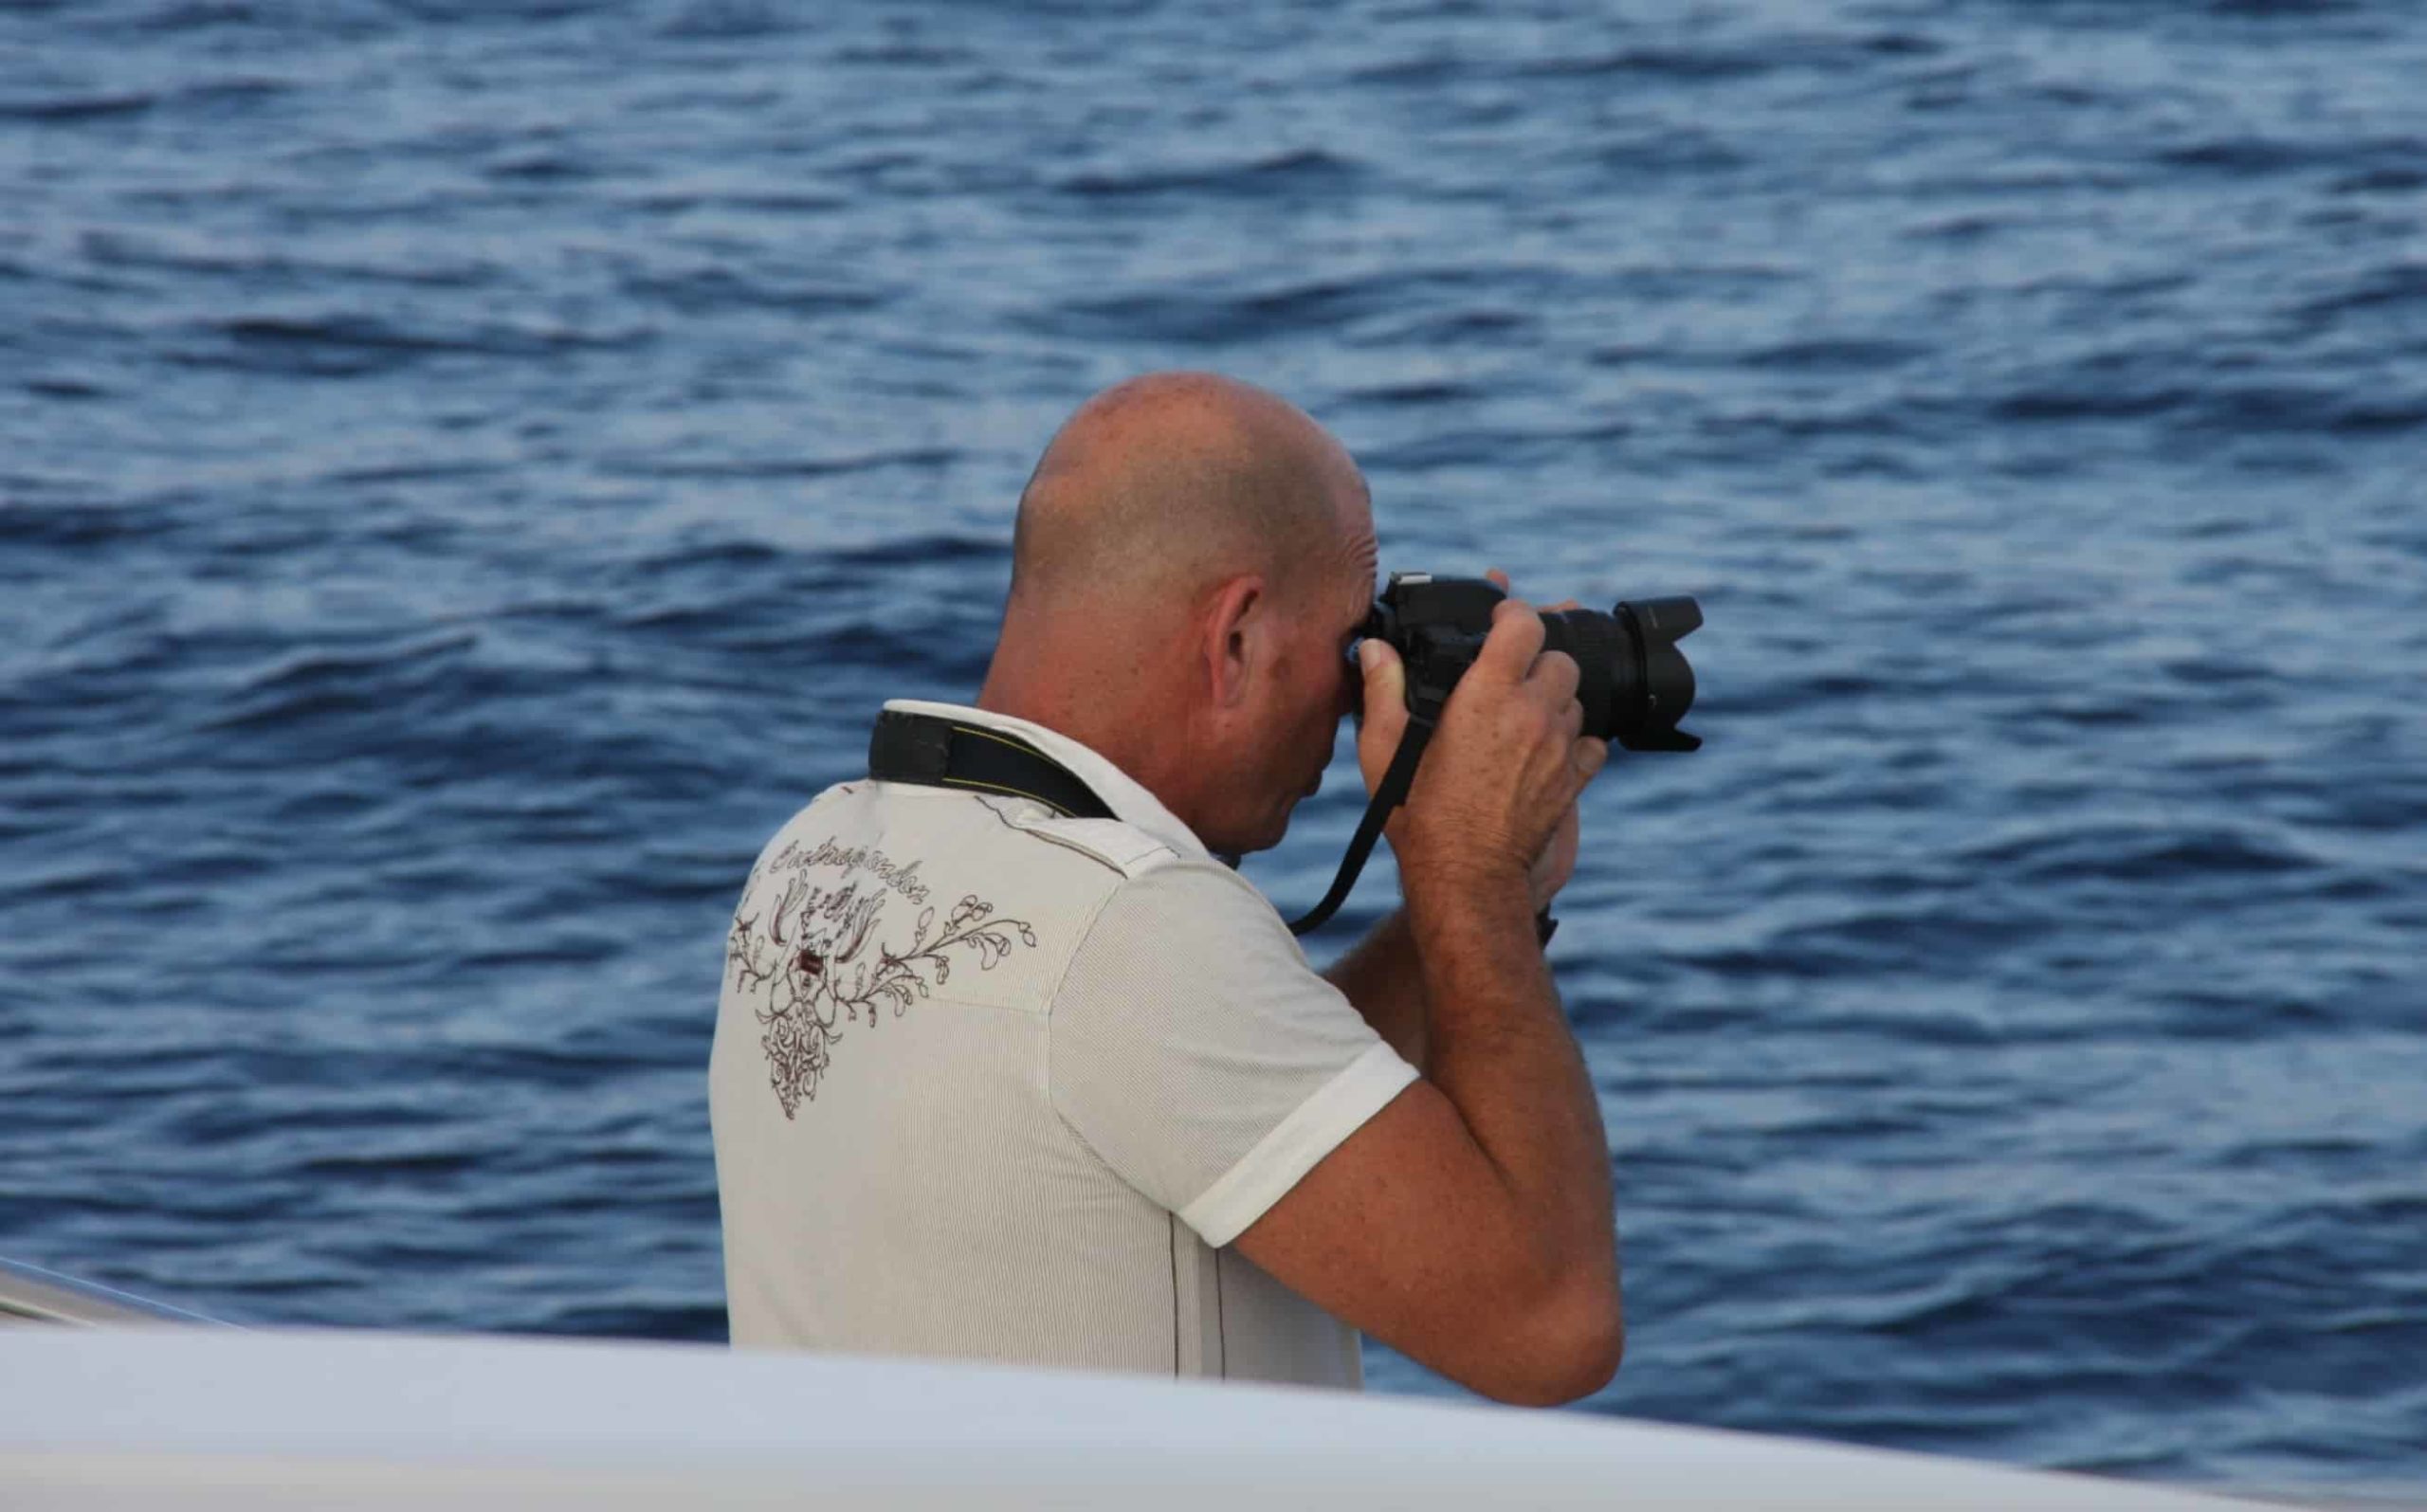 A sailor taking a photograph with an slr camera.